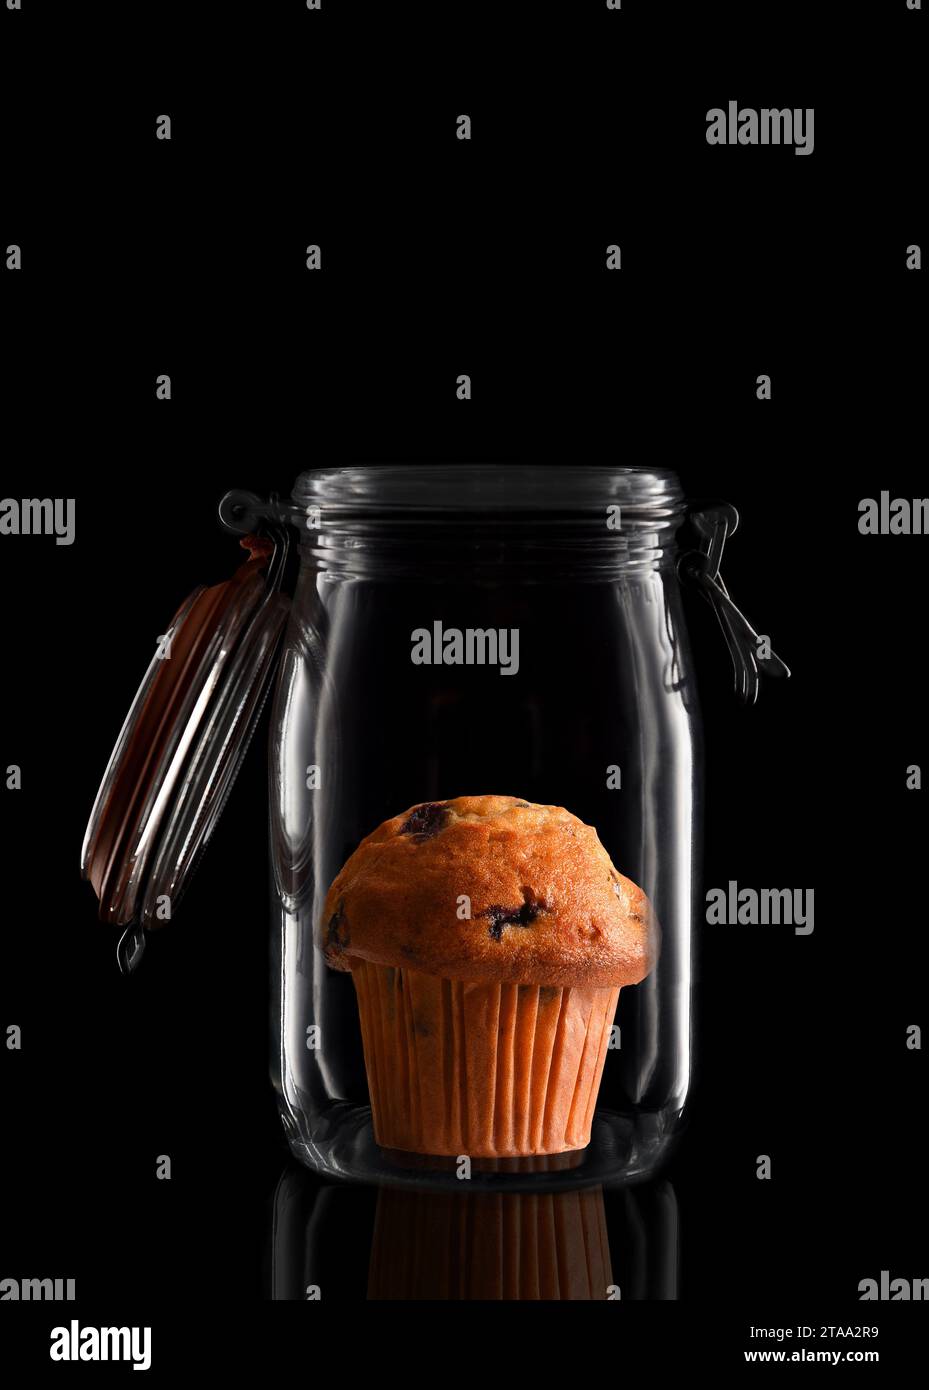 A Blueberry Muffin in a glass storage or canning jar isolated on black with reflection, with lid open. Stock Photo